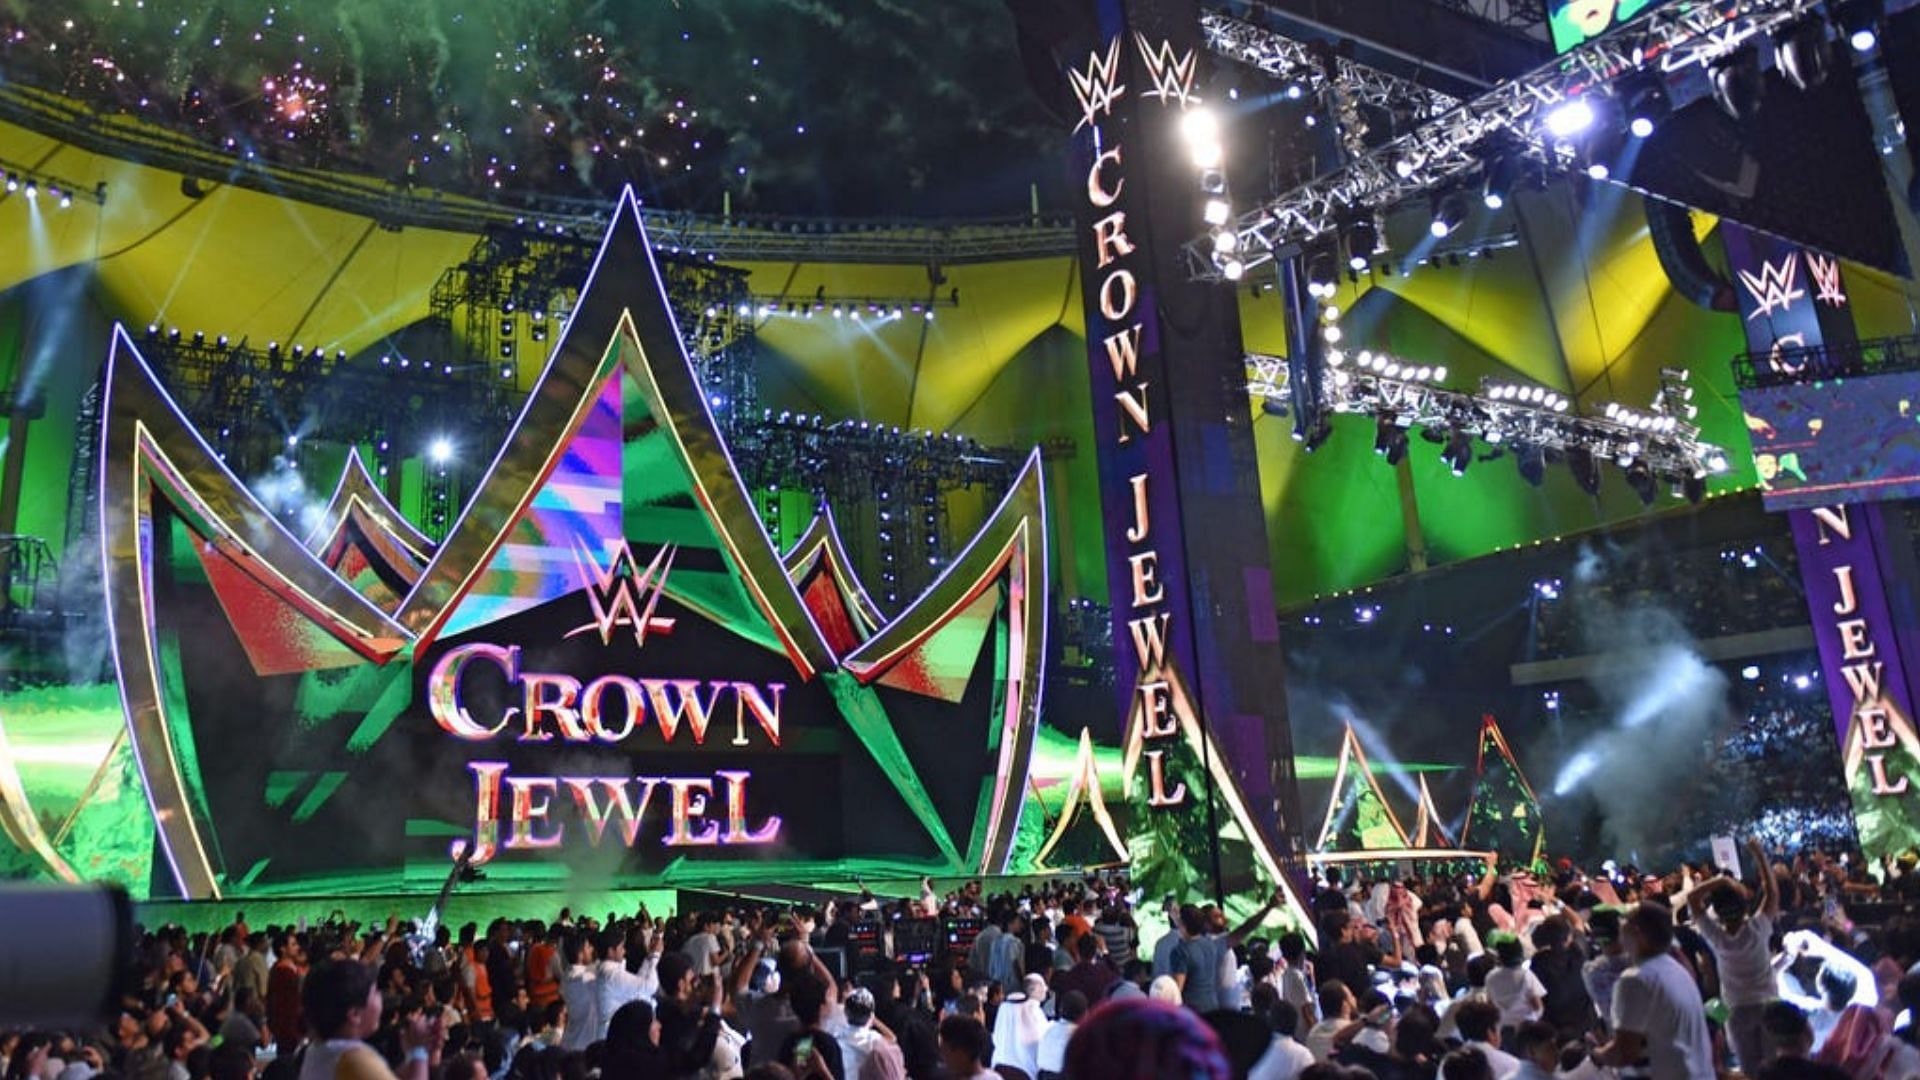 Details regarding the upcoming WWE Crown Jewel event